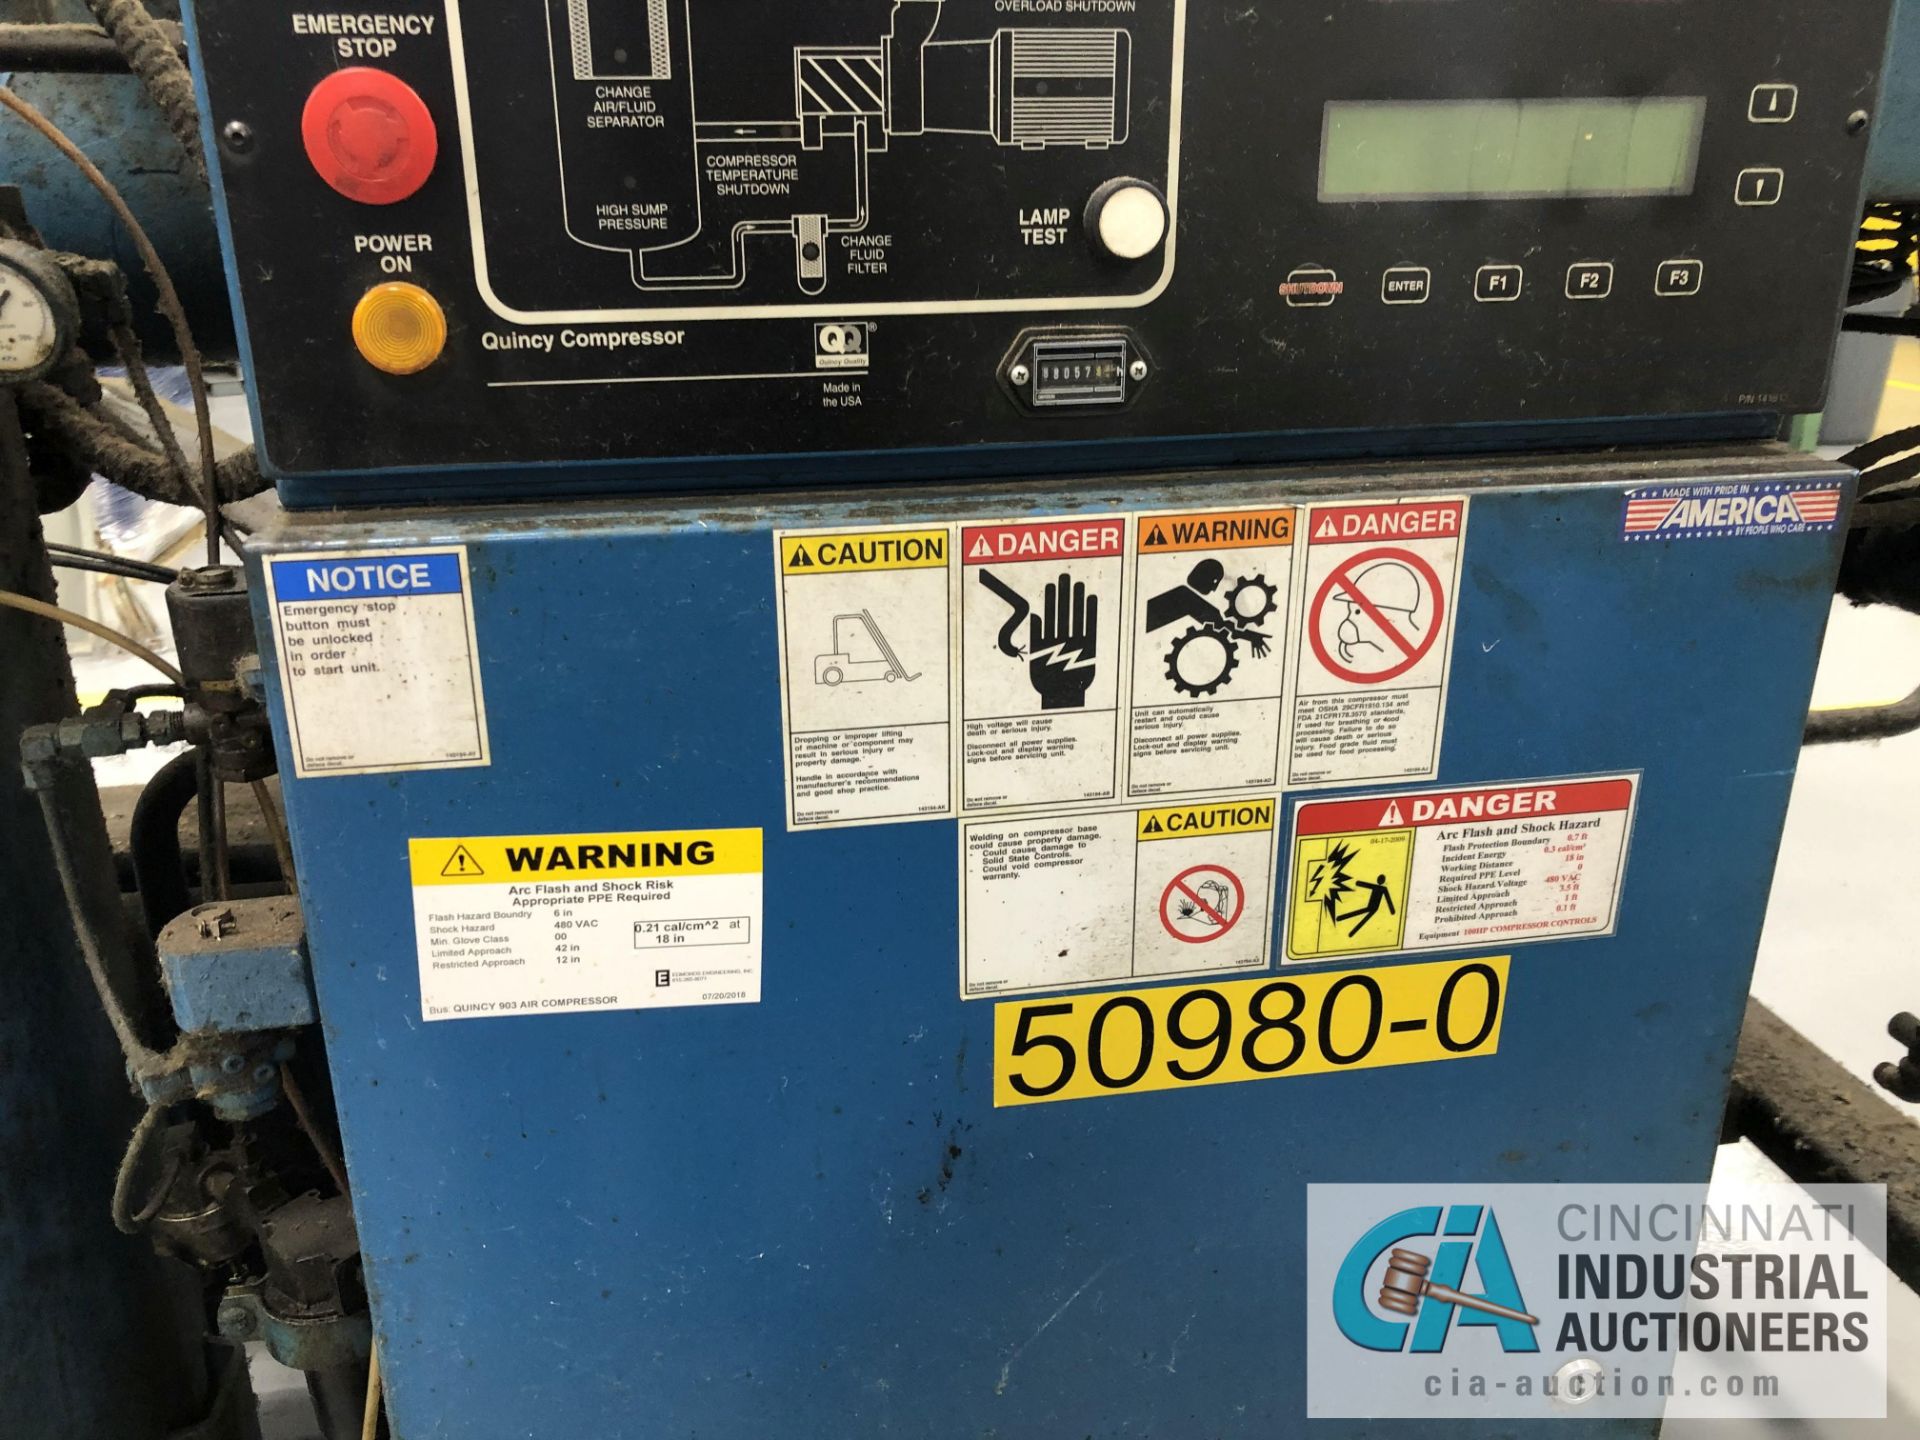 100 HP QUINCY MODEL QSI500-ANA31ED ROTARY SCREW AIR COMPRESSOR - $50.00 Rigging Fee Due to Onsite - Image 2 of 4